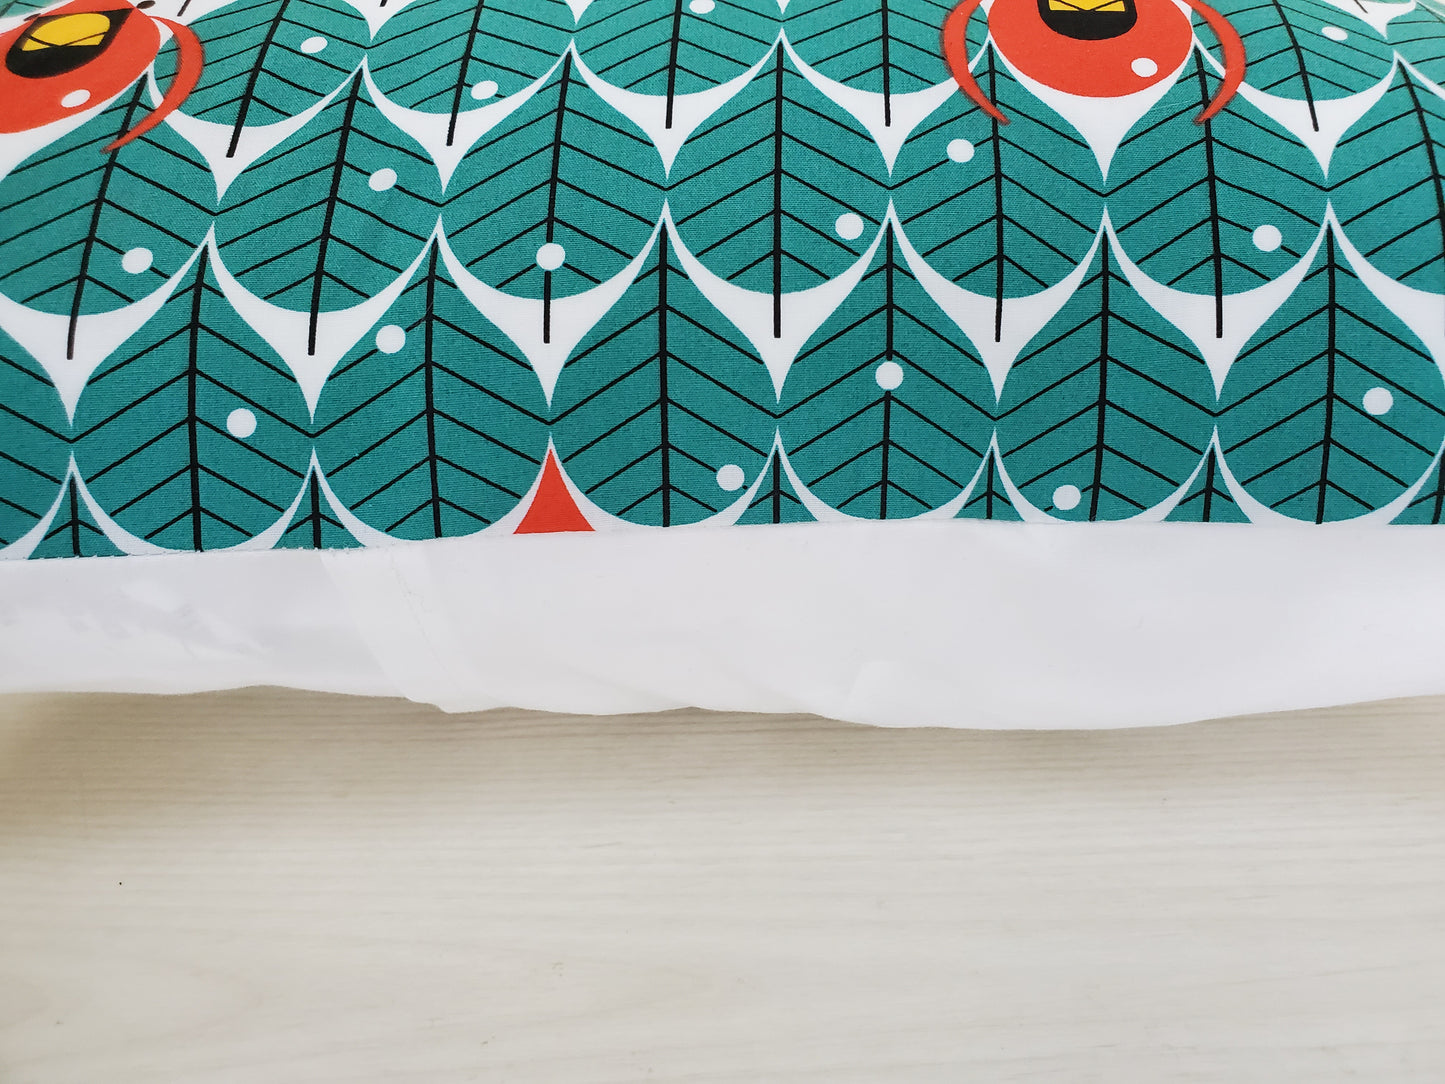 Organic Cotton Accent Pillows in Cardinal Holiday Prints